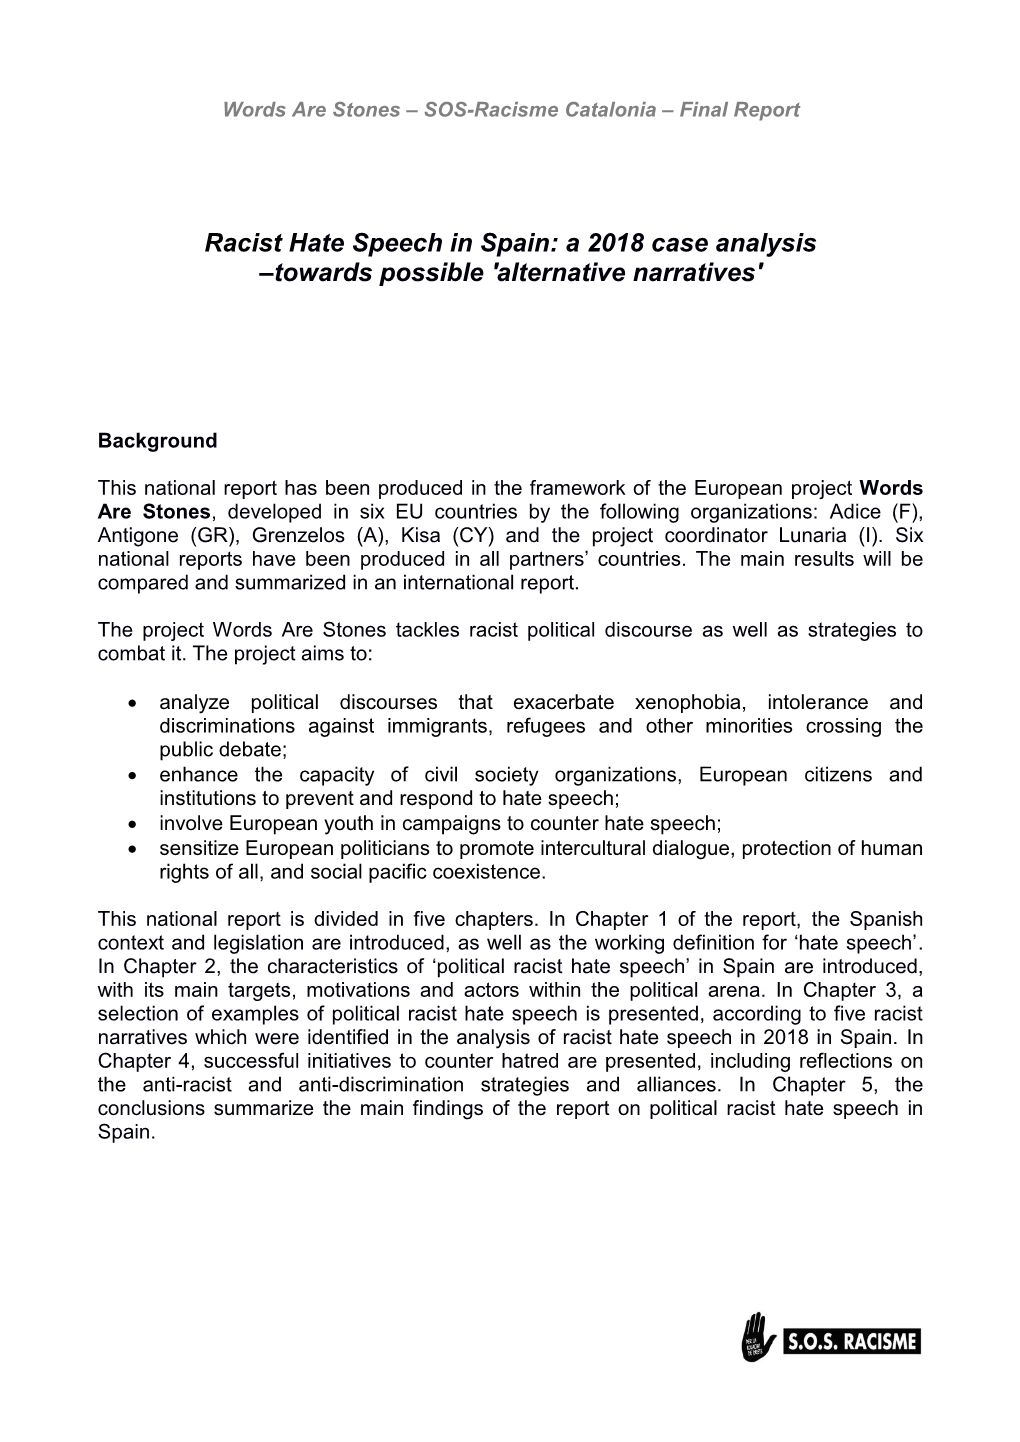 Racist Hate Speech in Spain: a 2018 Case Analysis –Towards Possible 'Alternative Narratives'